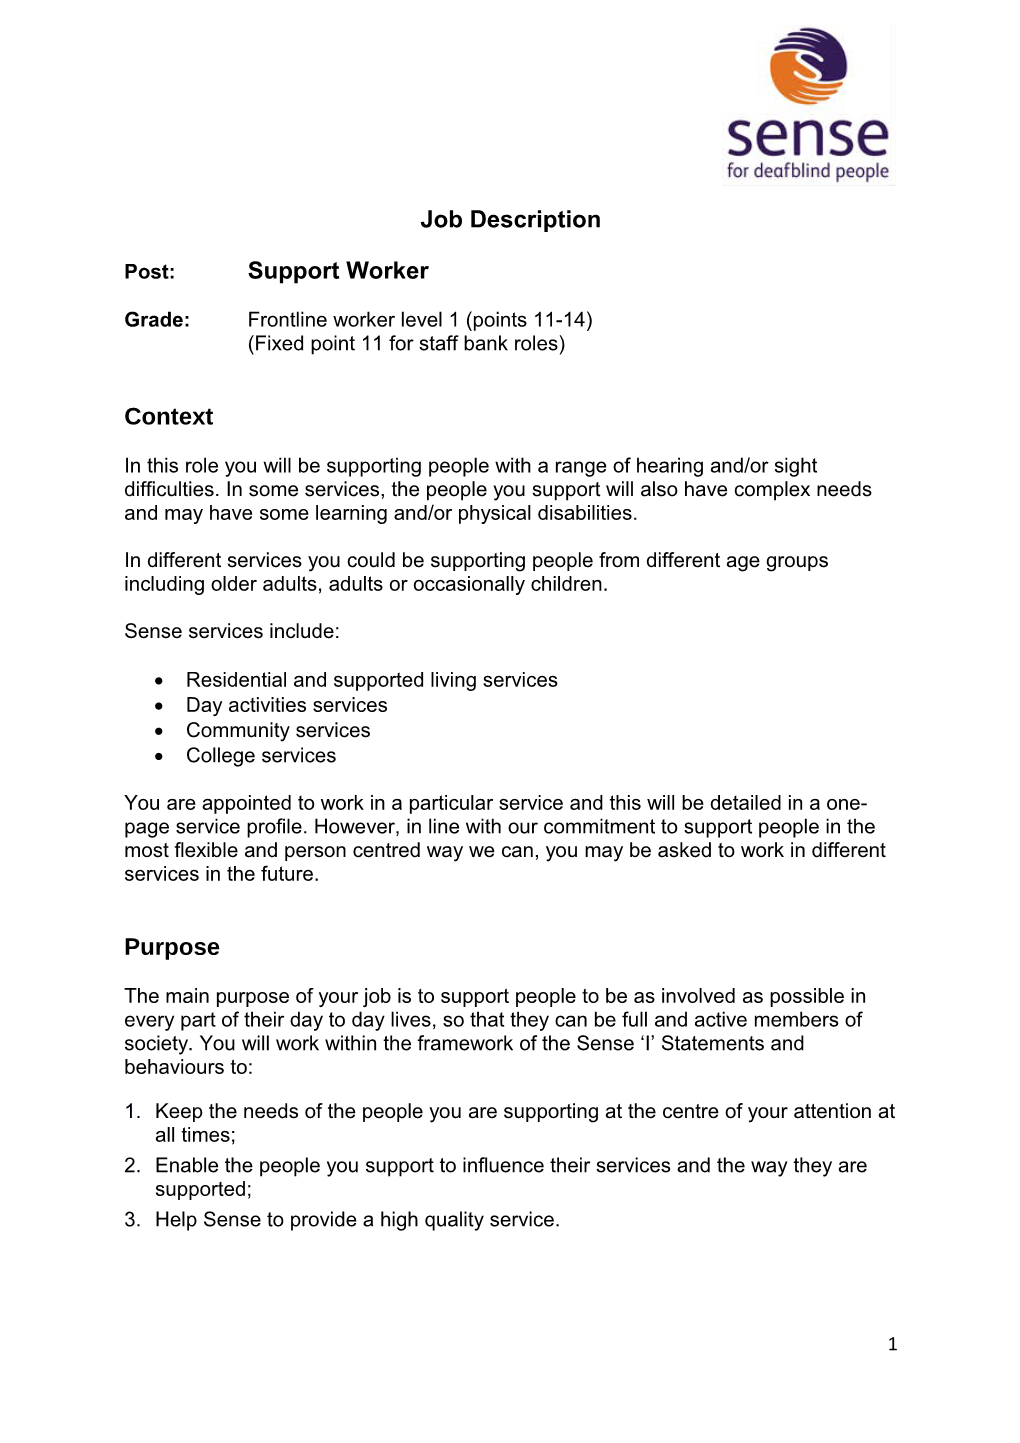 Post:Support Worker